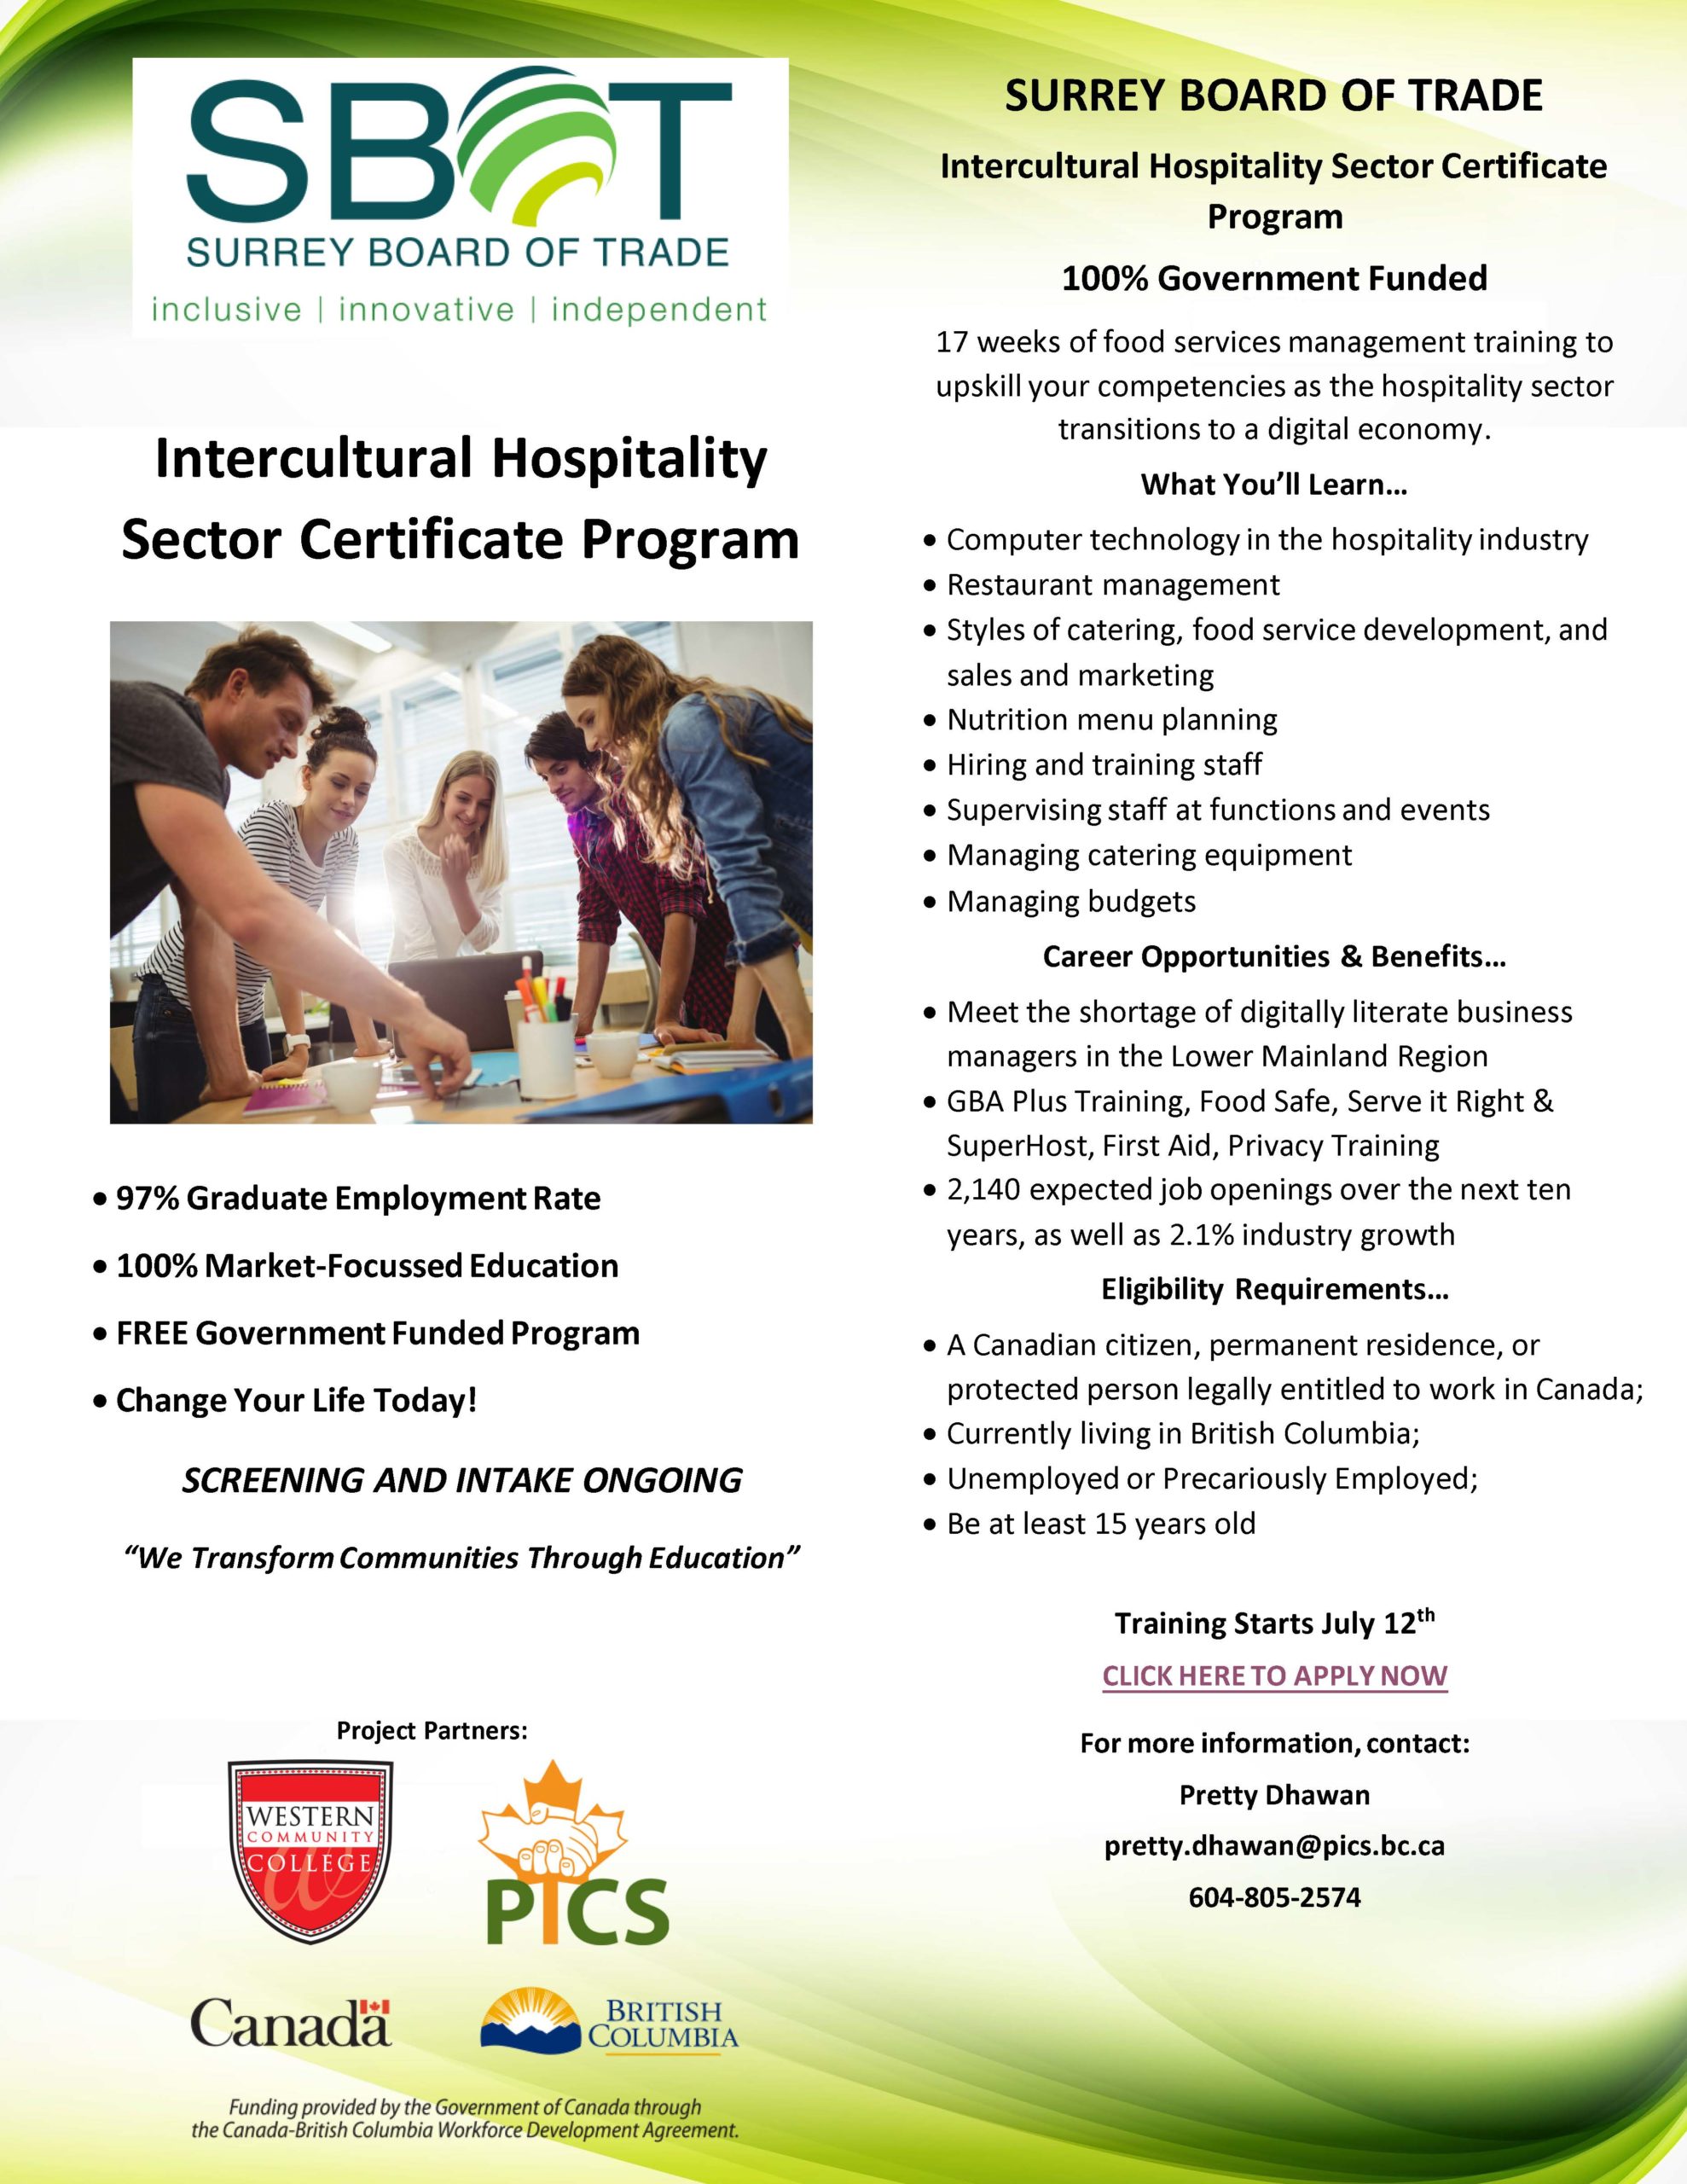 SBOT Intercultural Hospitality Sector Certificate Program Poster scaled 1